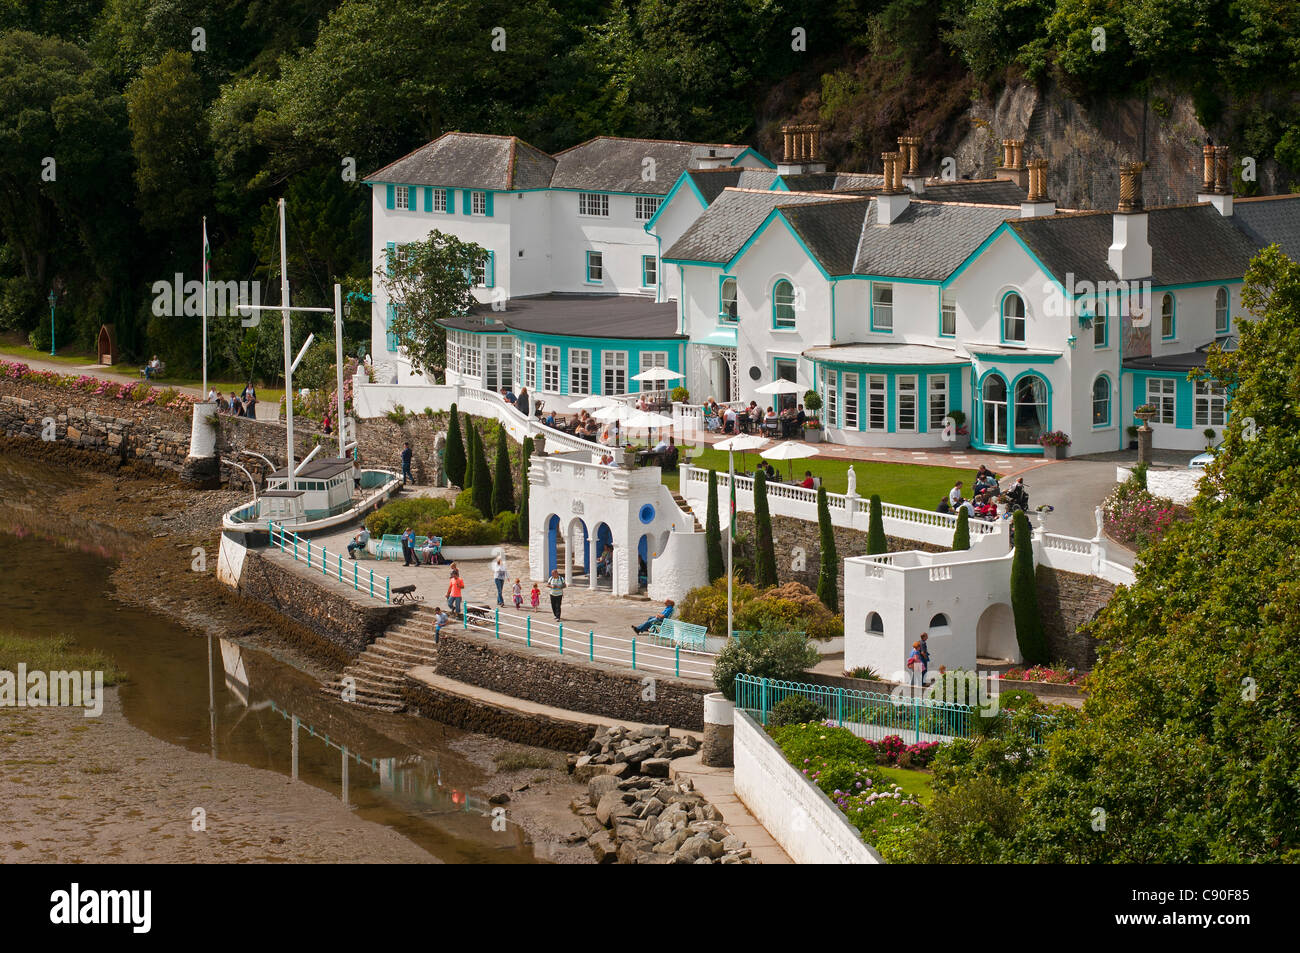 The village of Portmeirion, founded by Welsh architekt Sir Clough Williams-Ellis in 1926, Wales, UK Stock Photo